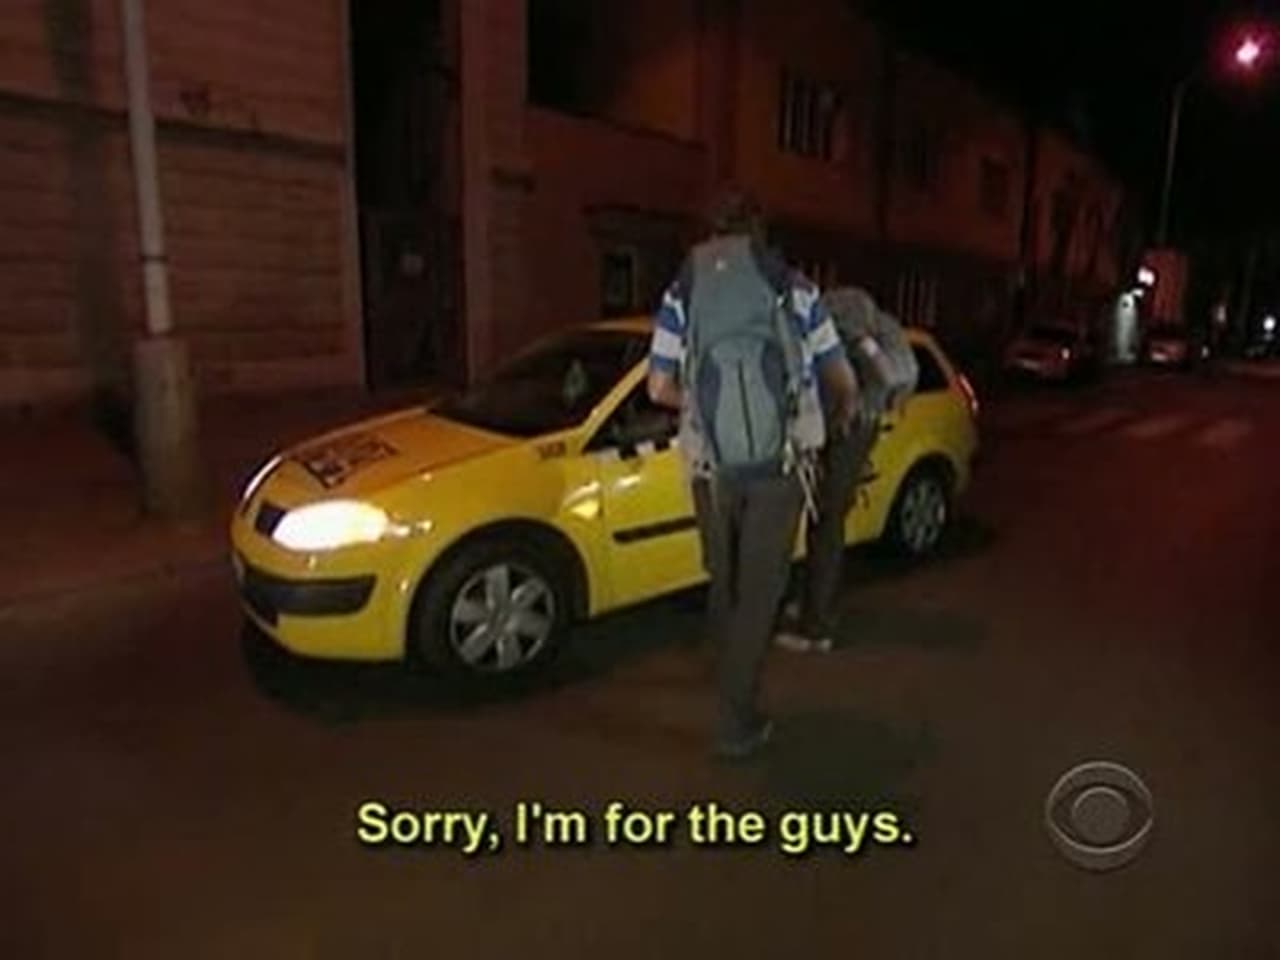 The Amazing Race - Season 15 Episode 10 : It Starts With an “F”, That’s All I’m Saying